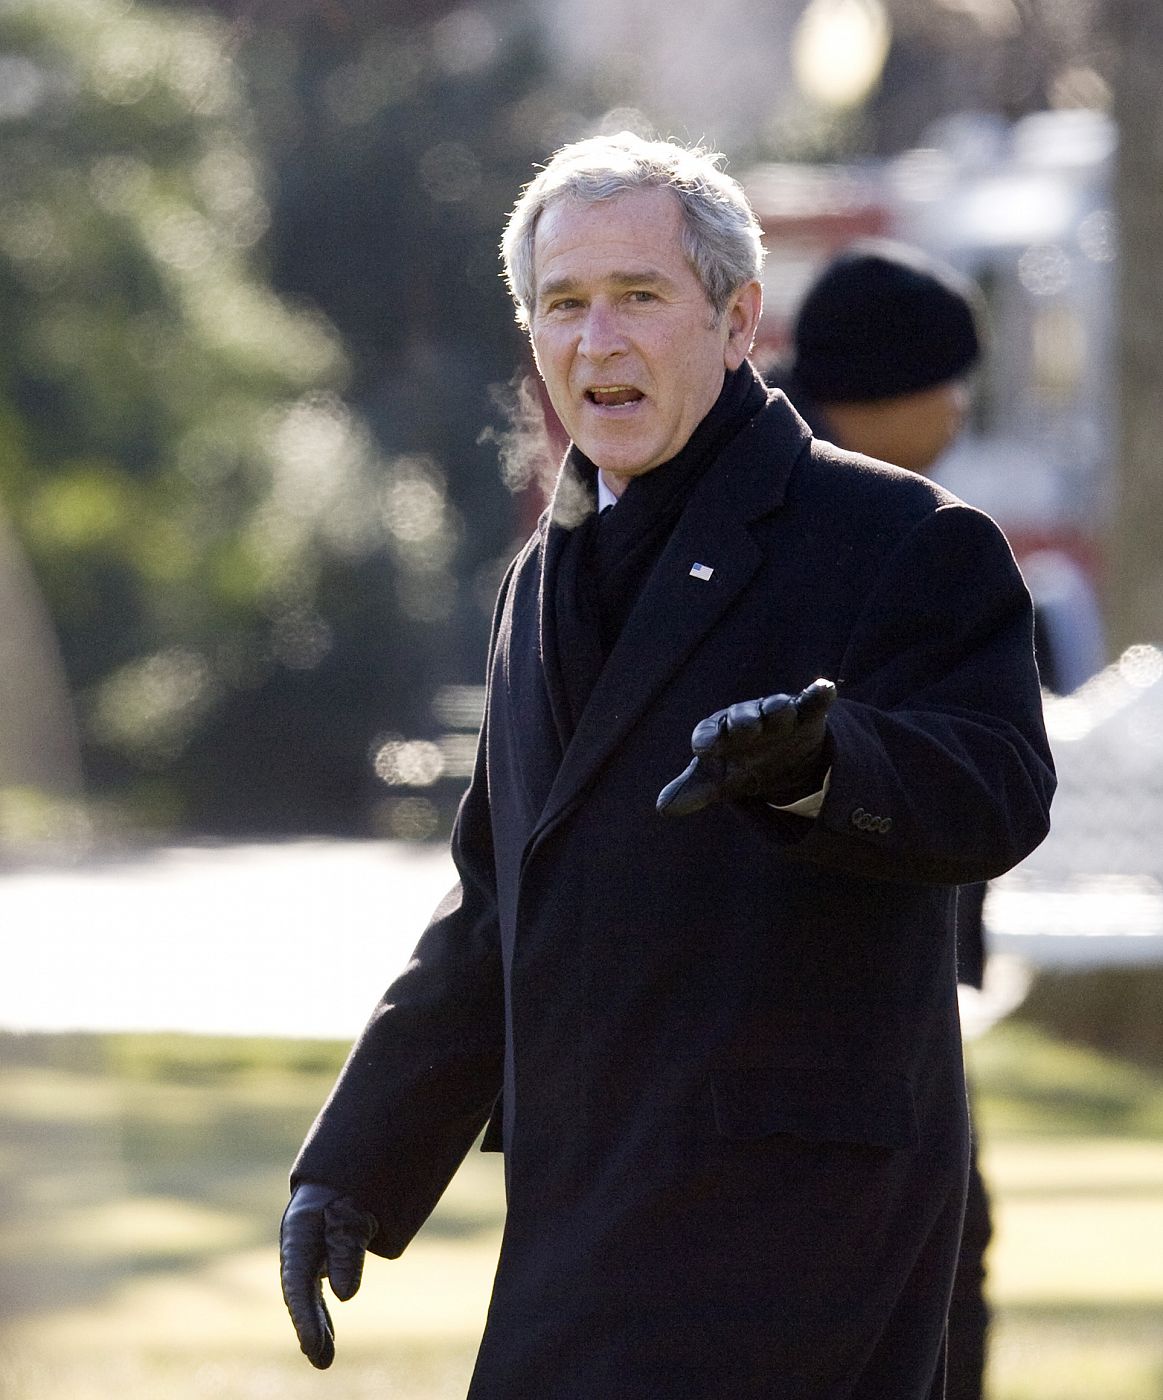 U.S. President Geore W. Bush waves before departing the White House in Washington